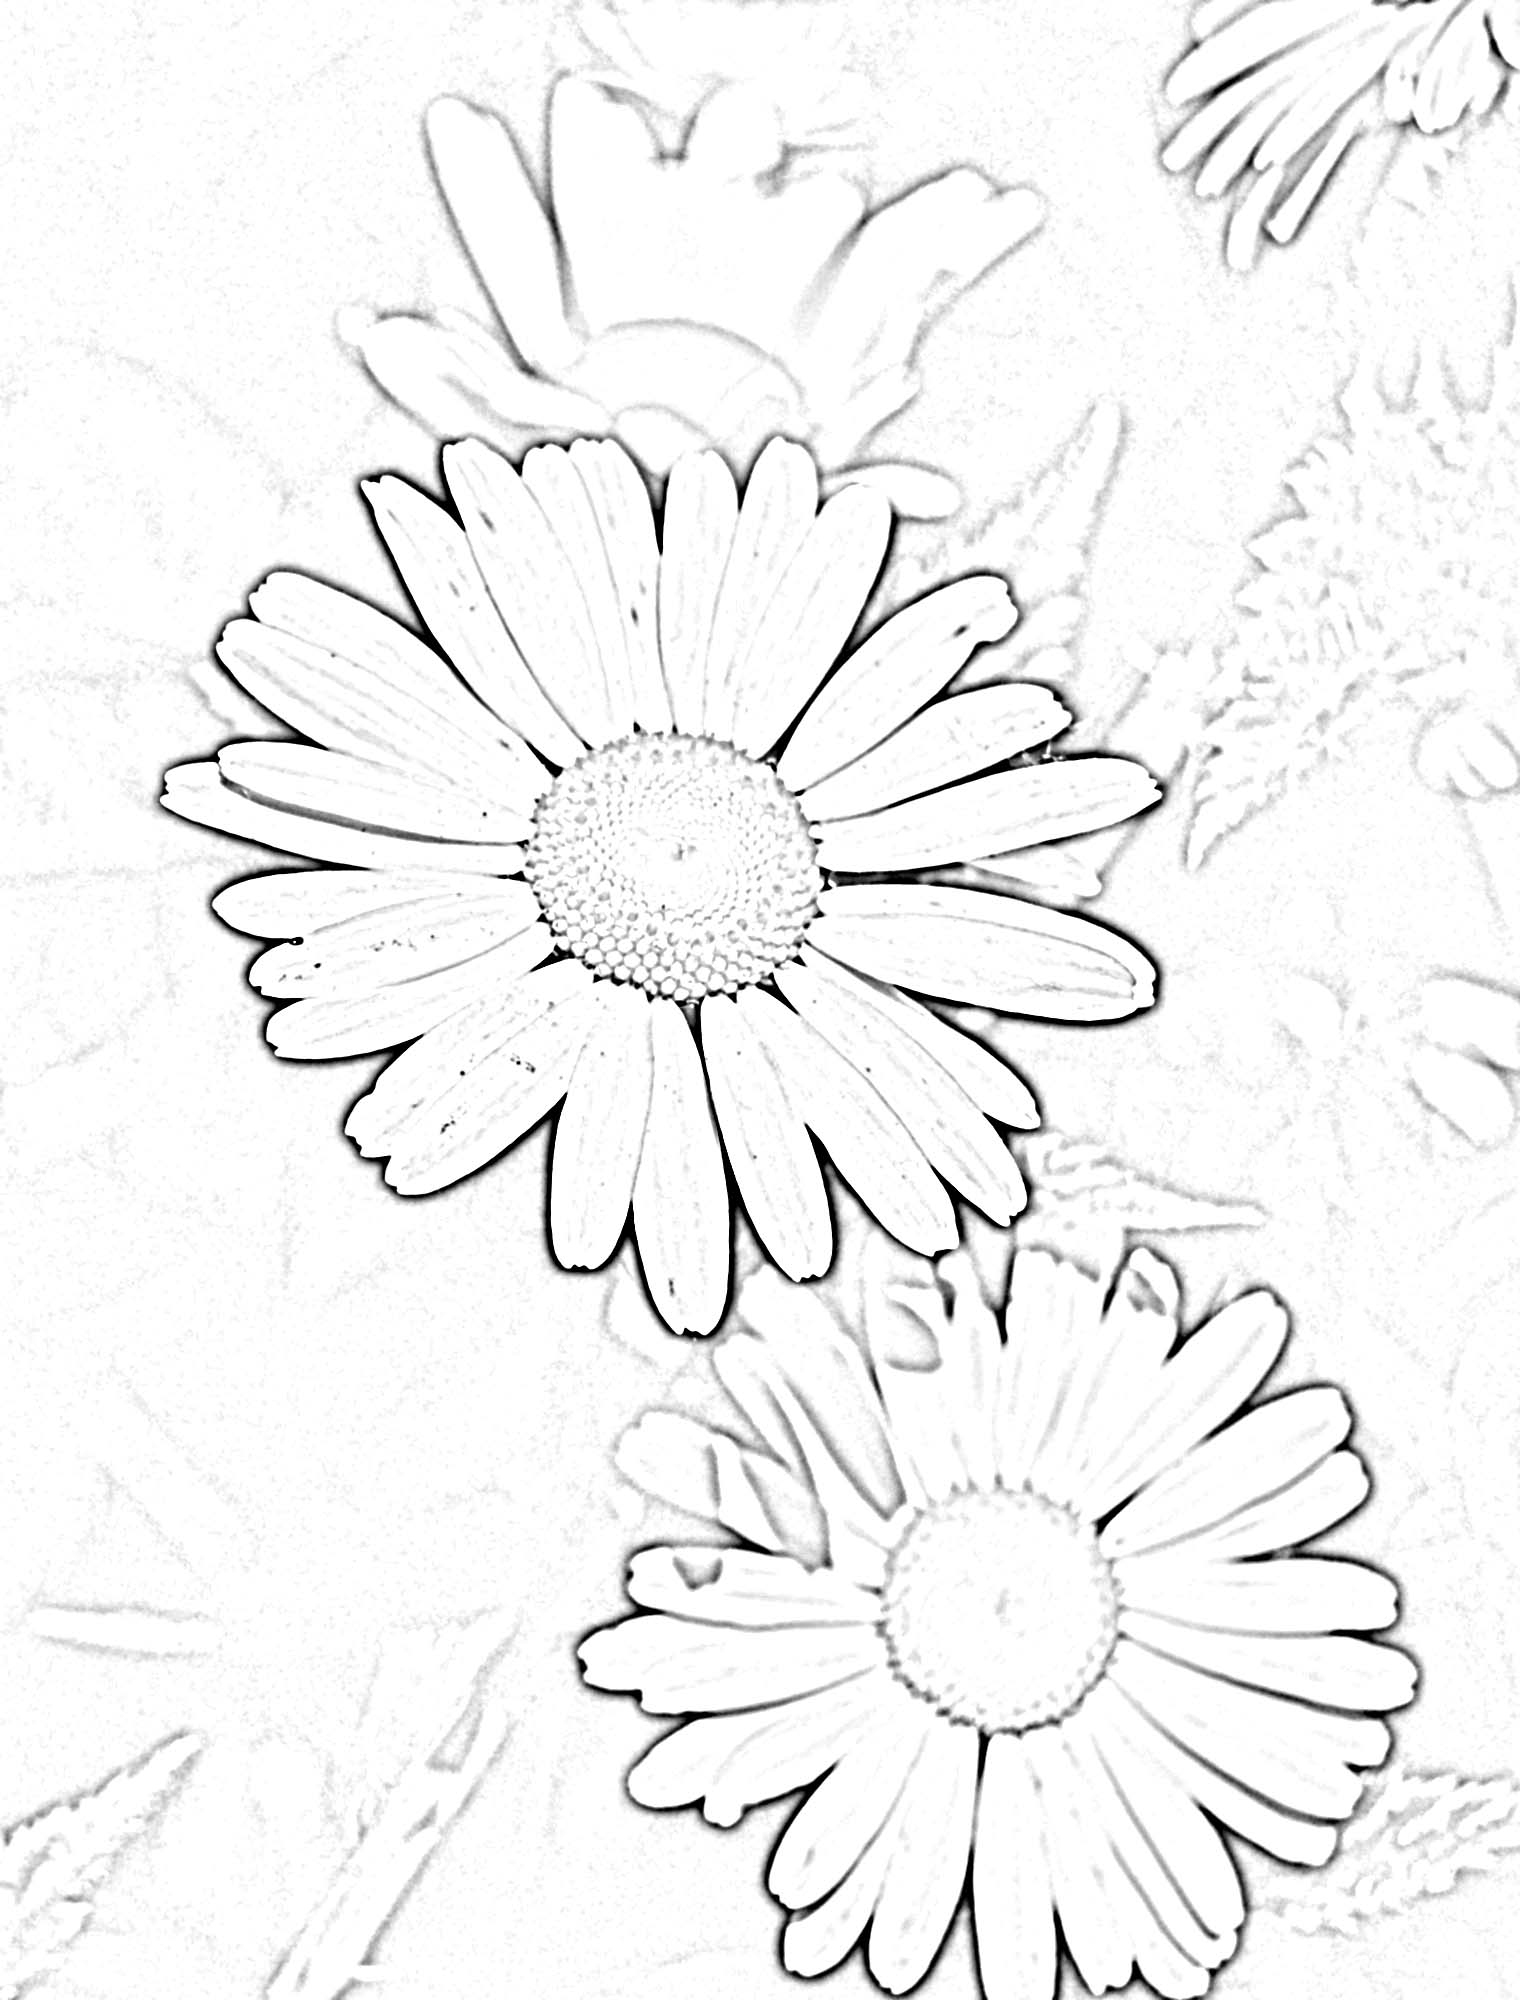 1520x2000 art for homeschool practice contour drawing - Daisy Drawing Outli...